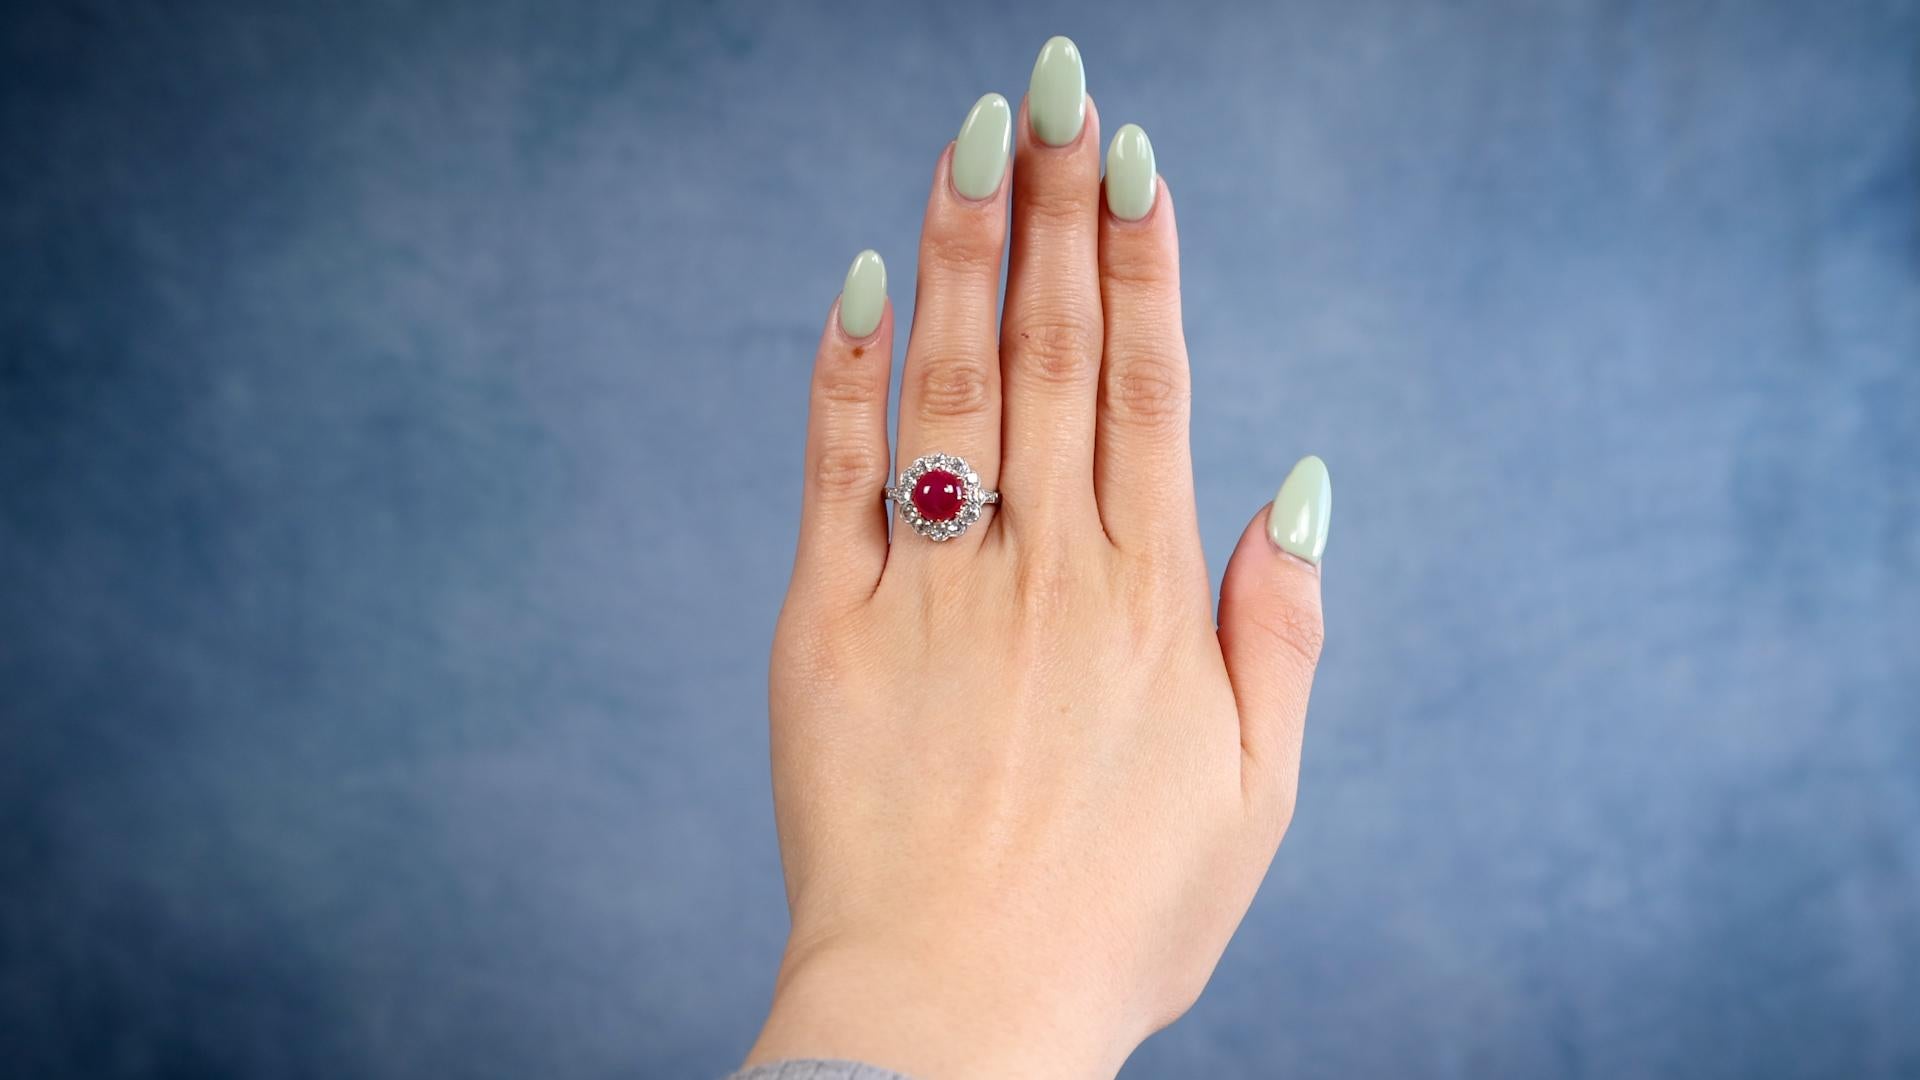 One Art Deco Inspired Ruby Diamond Platinum 14k Yellow Gold Ring. Featuring one cabochon cut ruby of 3.79 carats. Accented by 18 old European cut diamonds with a total weight of approximately 1.45 carats, graded J-K color, SI clarity. Crafted in